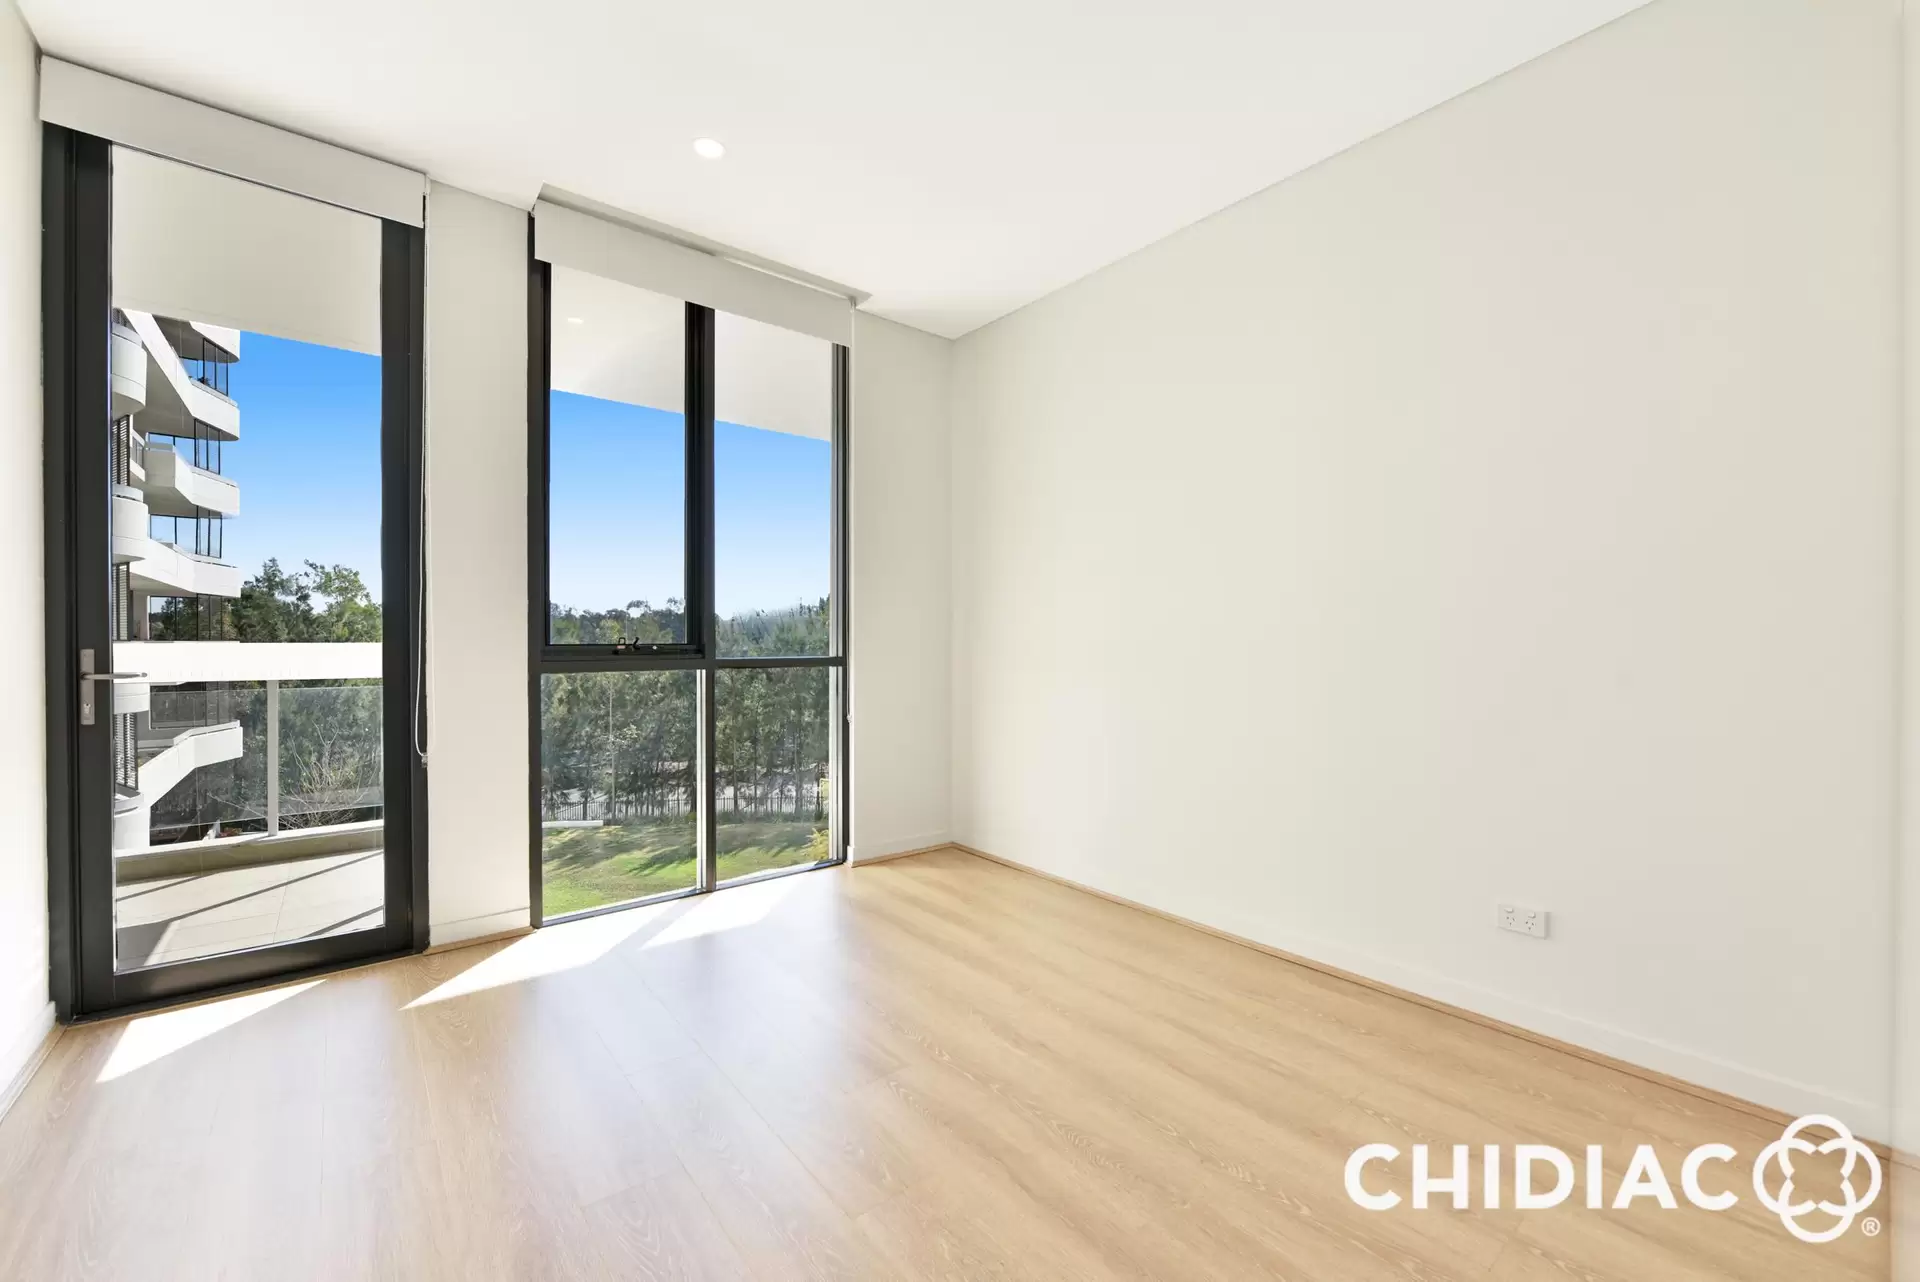 209/2 Kingfisher Street, Lidcombe Leased by Chidiac Realty - image 1